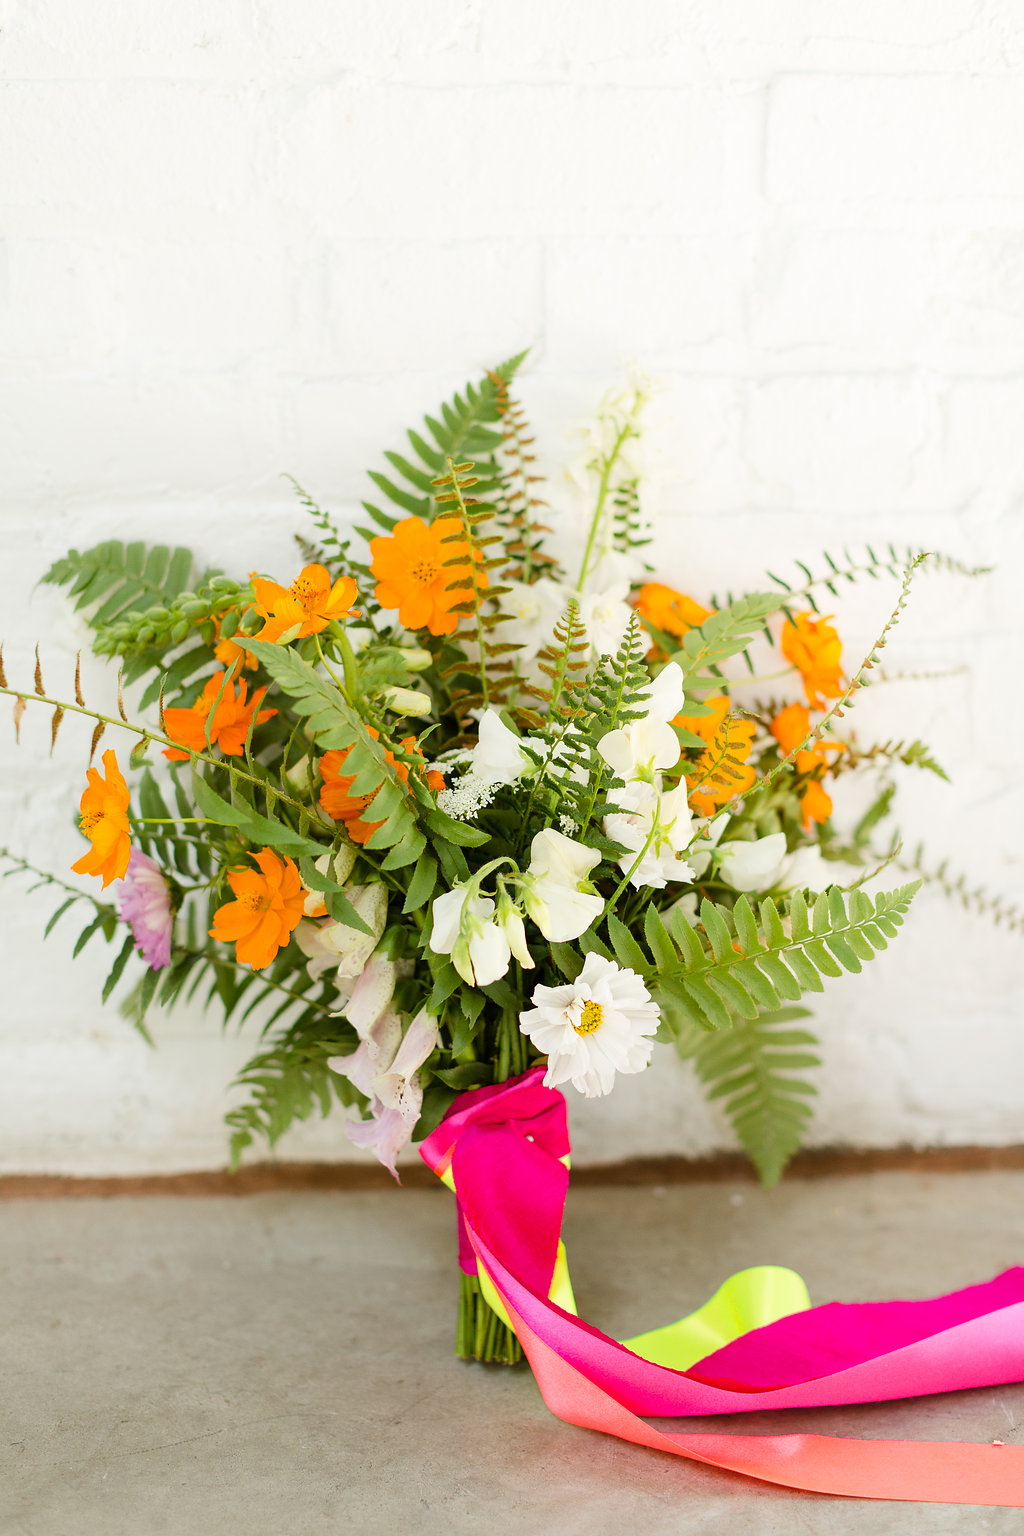 Neon Wedding Bouquet with Ferns by Taproot Flowers / photo by Jessica Haley Photography